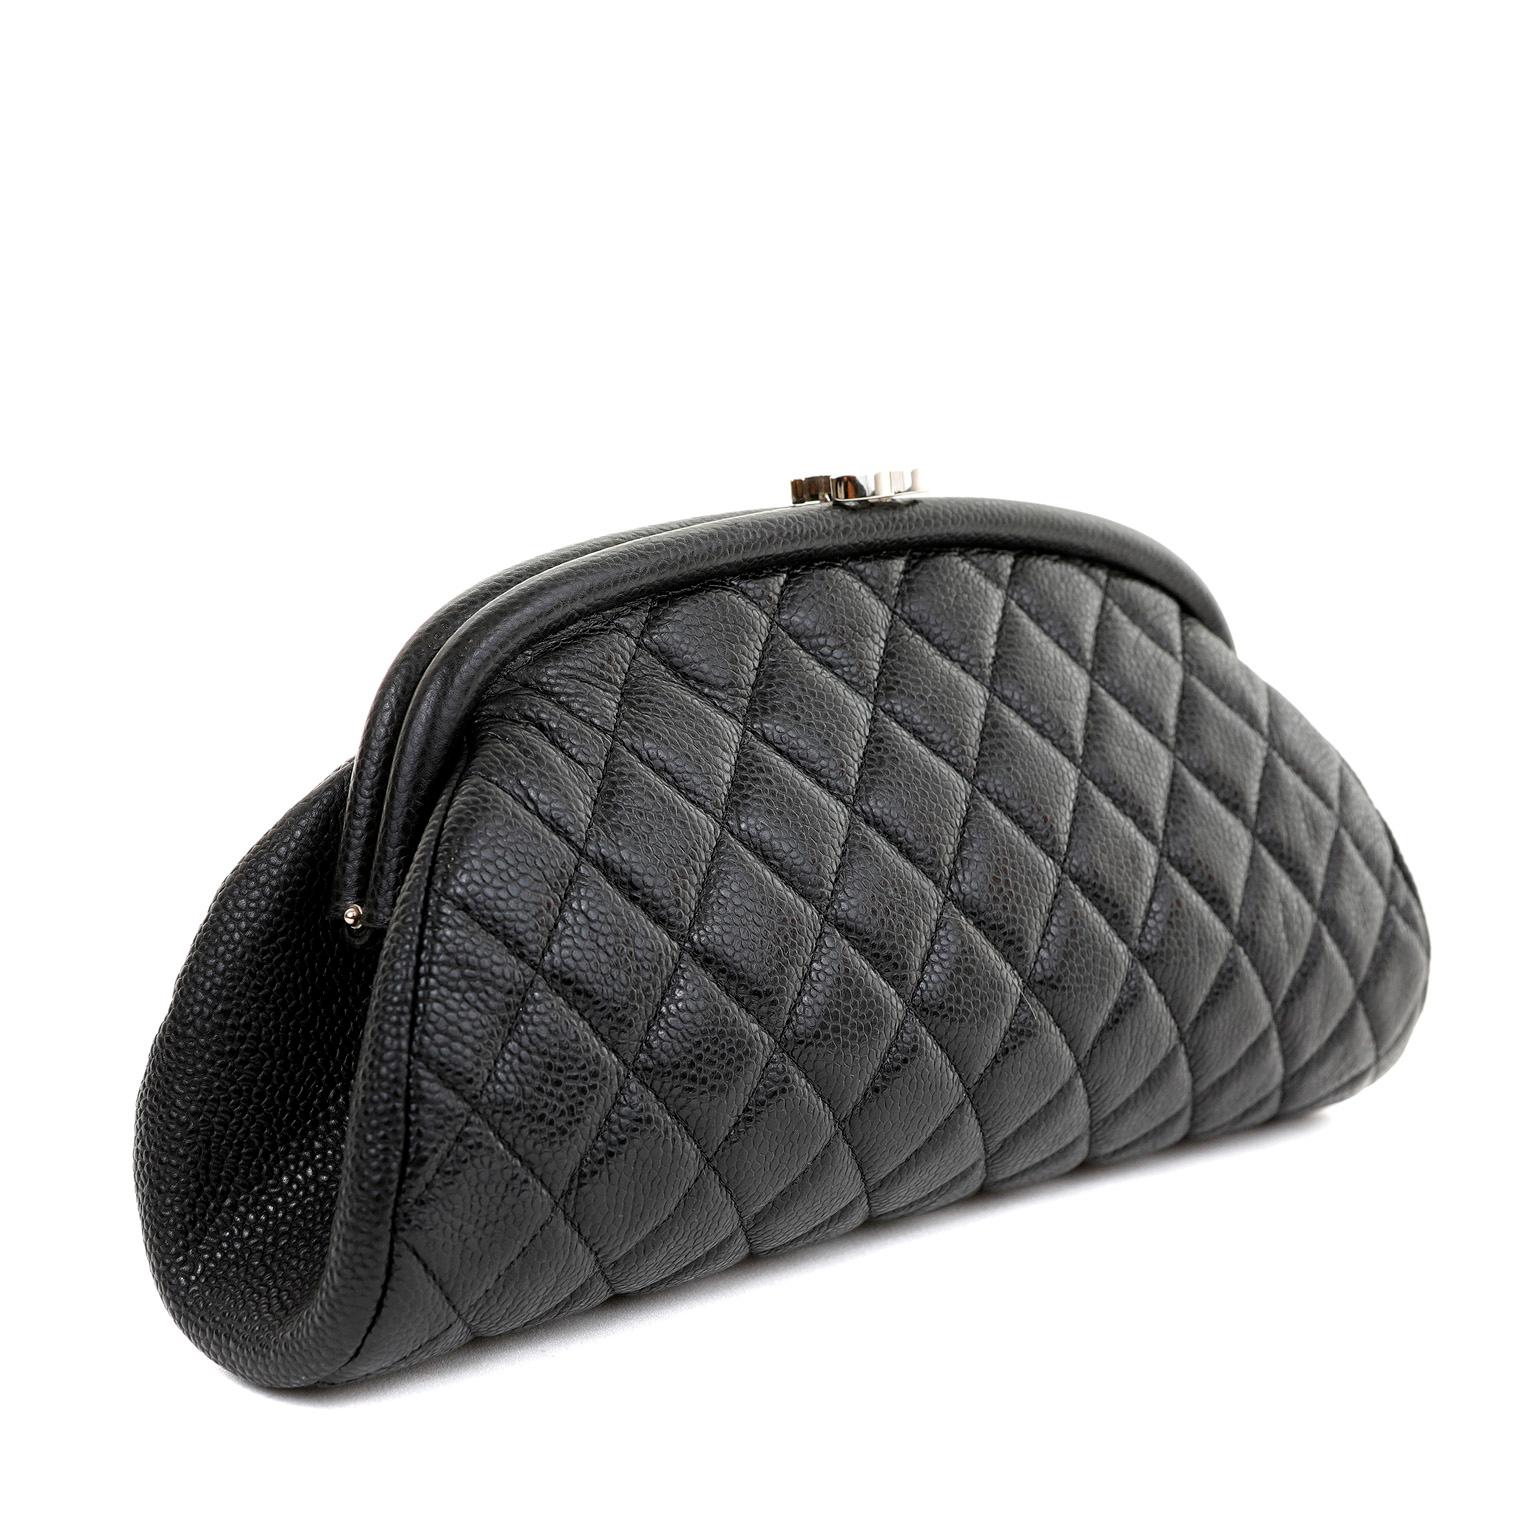 This authentic Chanel Black Caviar Timeless Clutch is in pristine condition. A true classic, this elegant black clutch is a key piece in any sophisticated wardrobe.
Black caviar leather is textured and durable.  Quilted in signature Chanel diamond